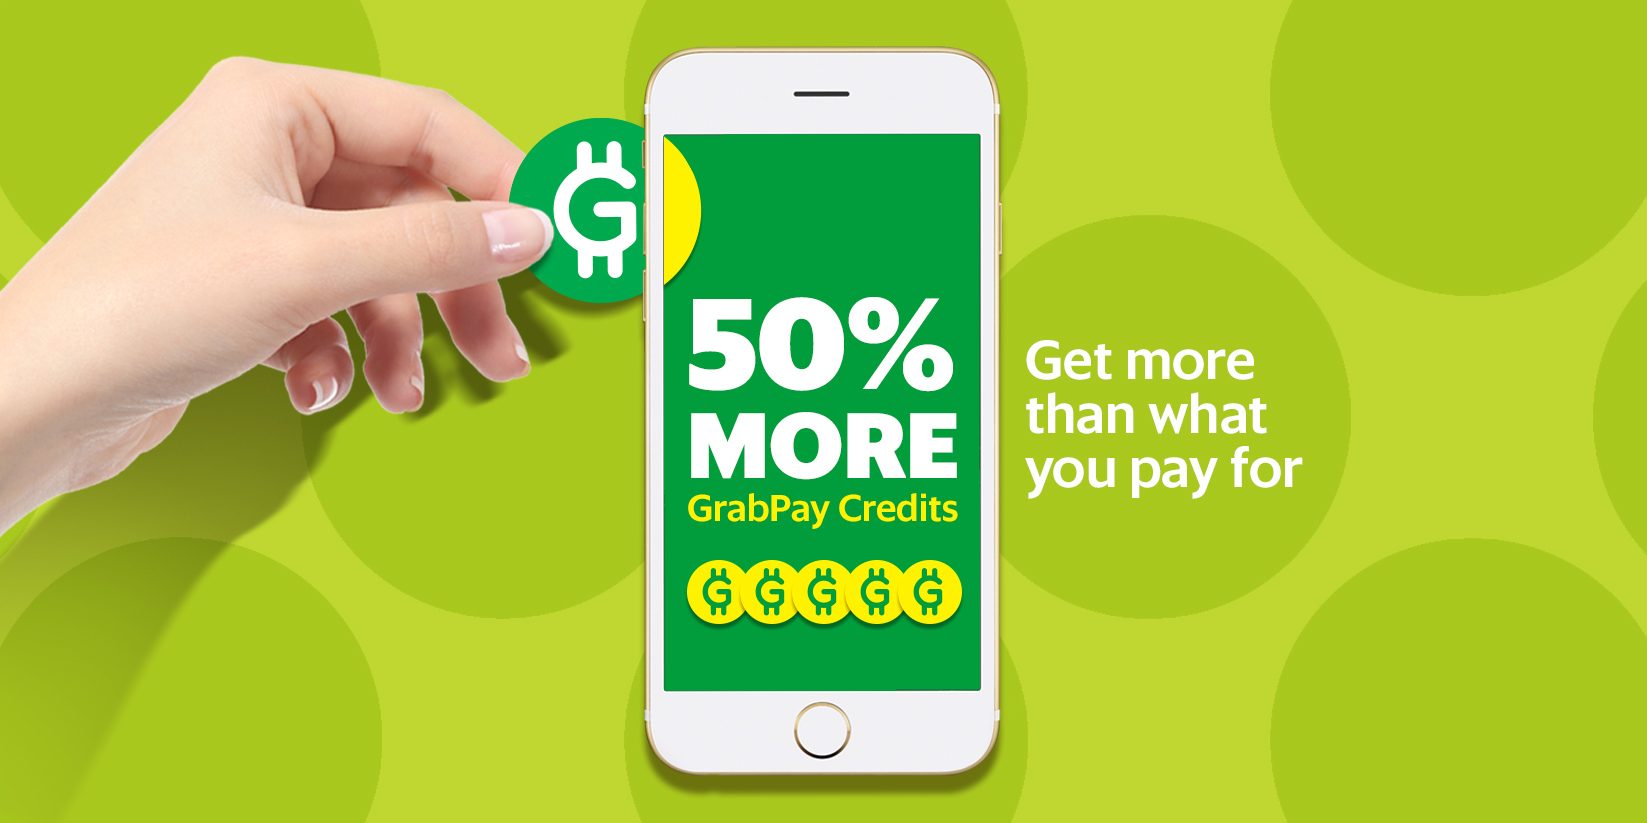 Grab Singapore Top-up GrabPay Credits & Get 50% More 1 Day Only Promotion 12 Apr 2017